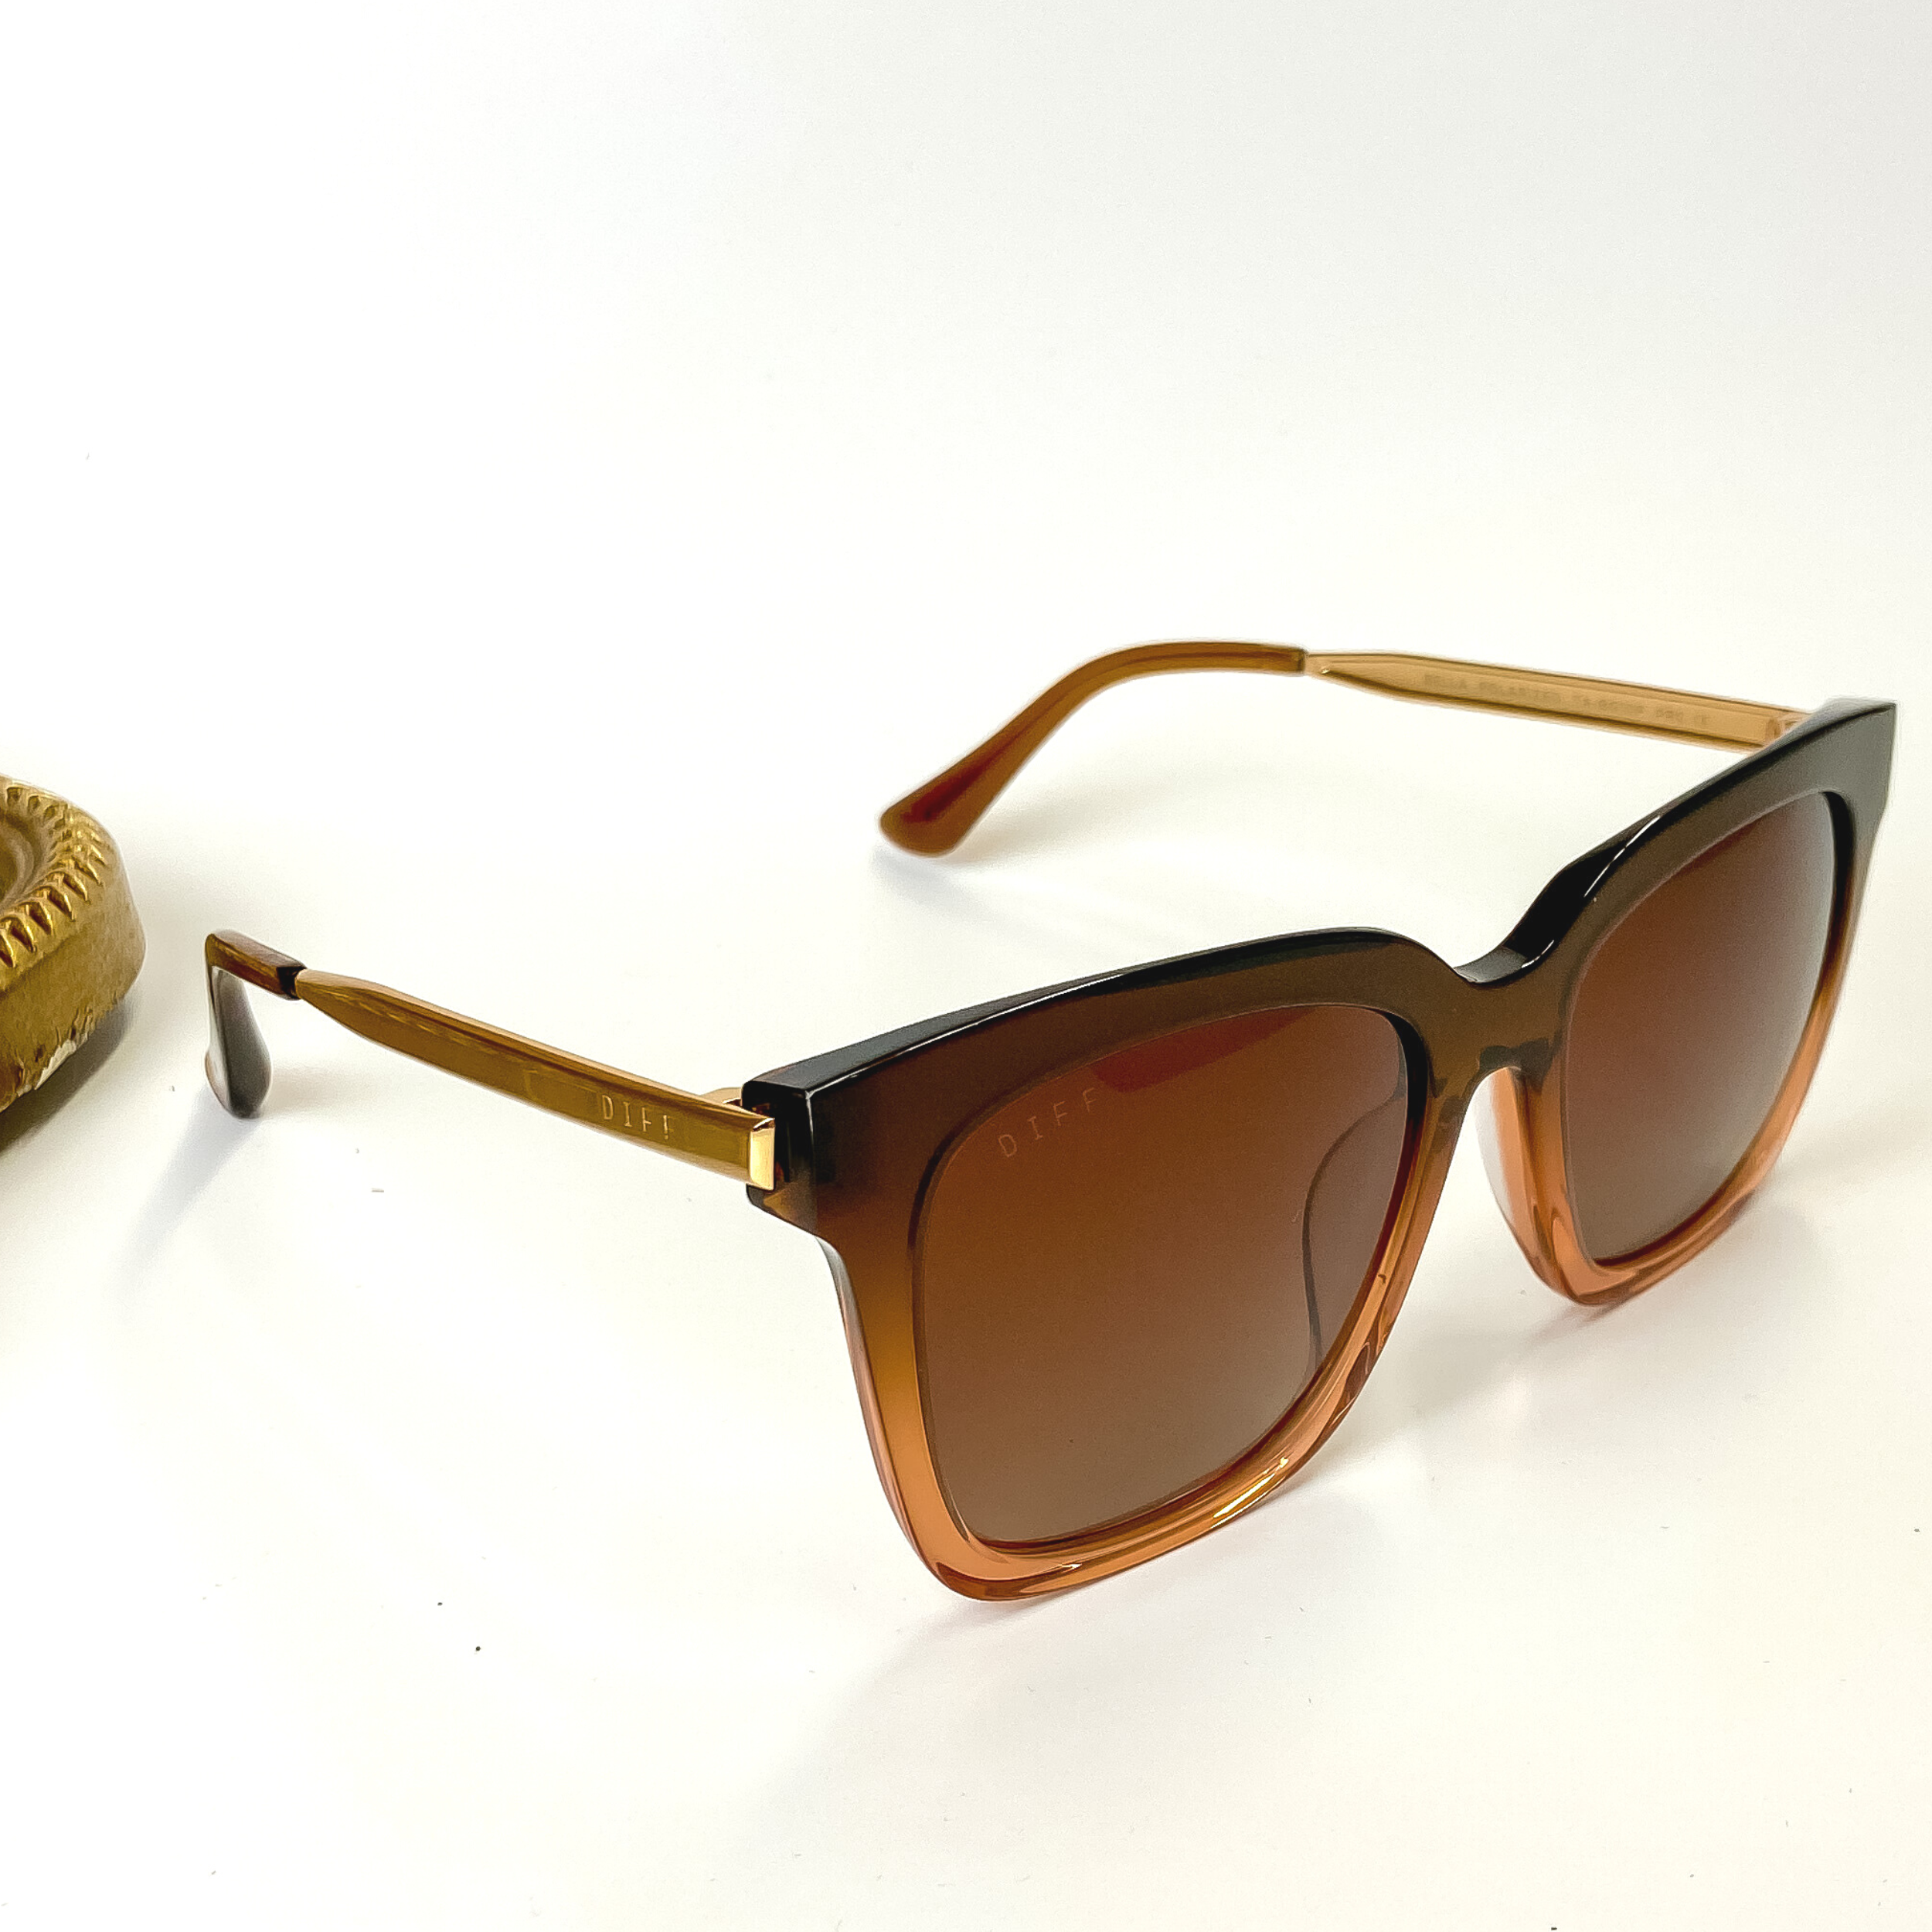 A pair of brown lens sunglasses with taupe ombre frames. These sunglasses are pictured on a white background with gold jewelry.